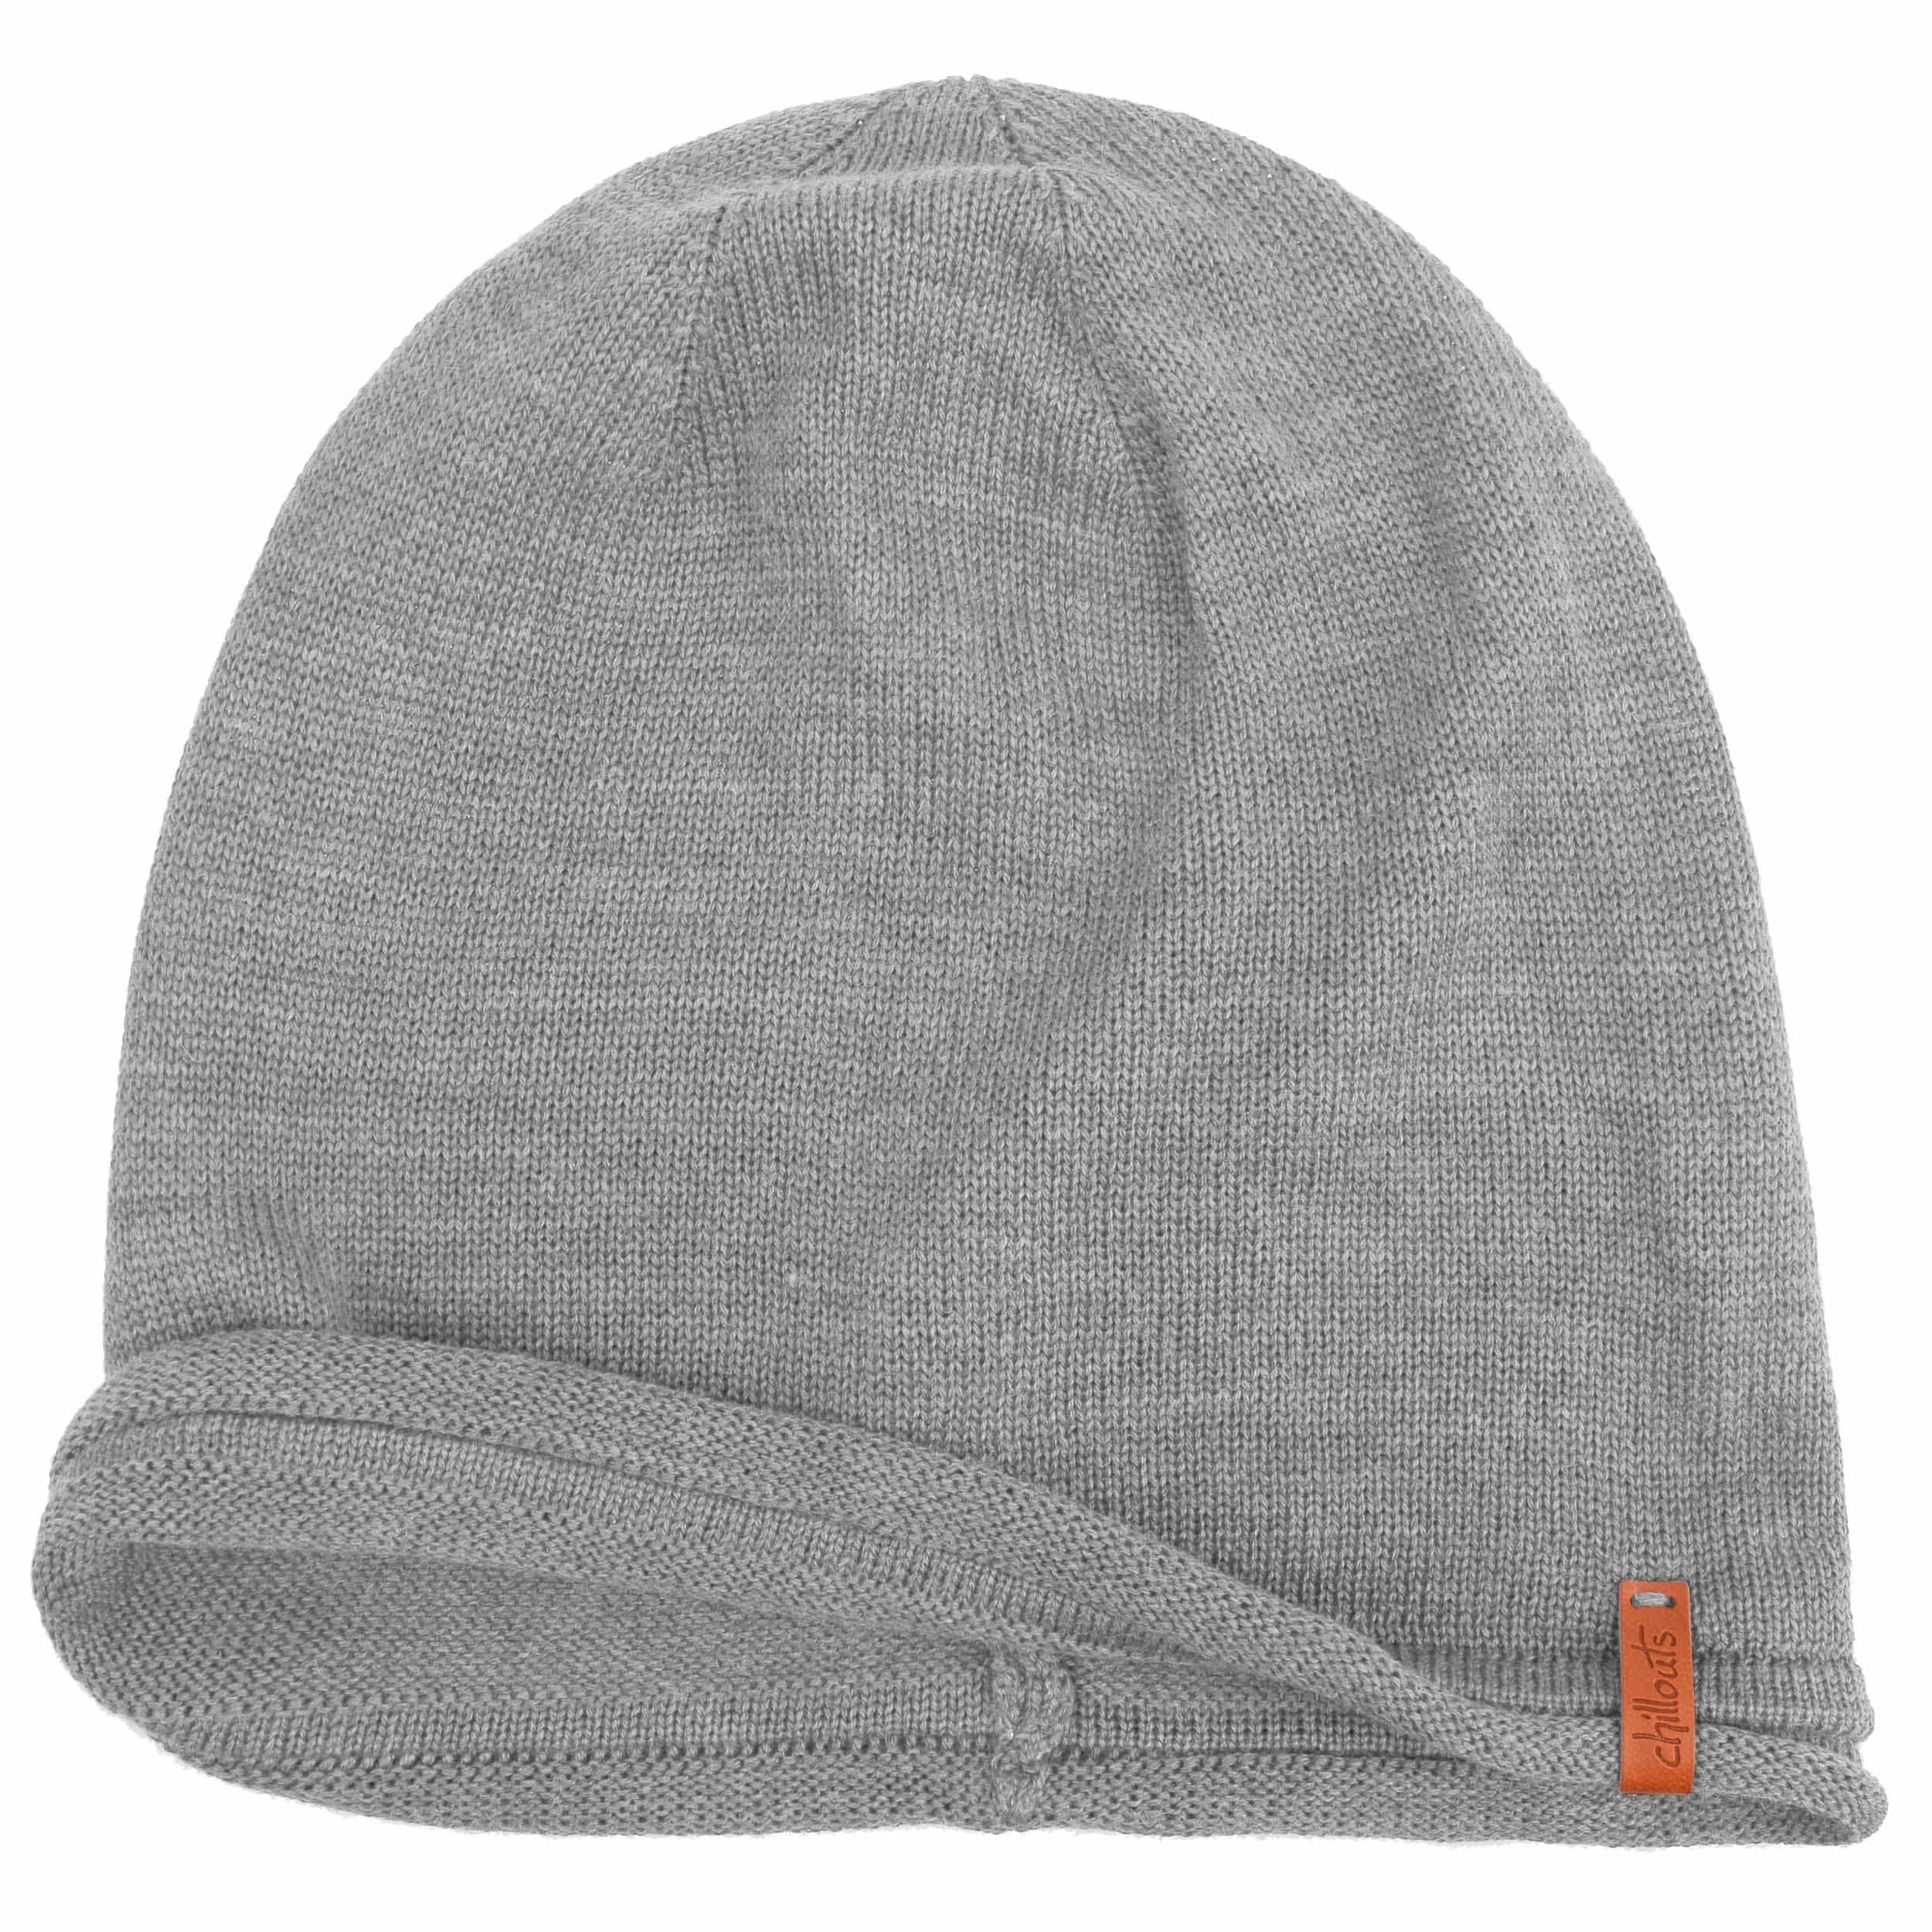 Leicester Oversize Beanie by Chillouts 27,99 € 